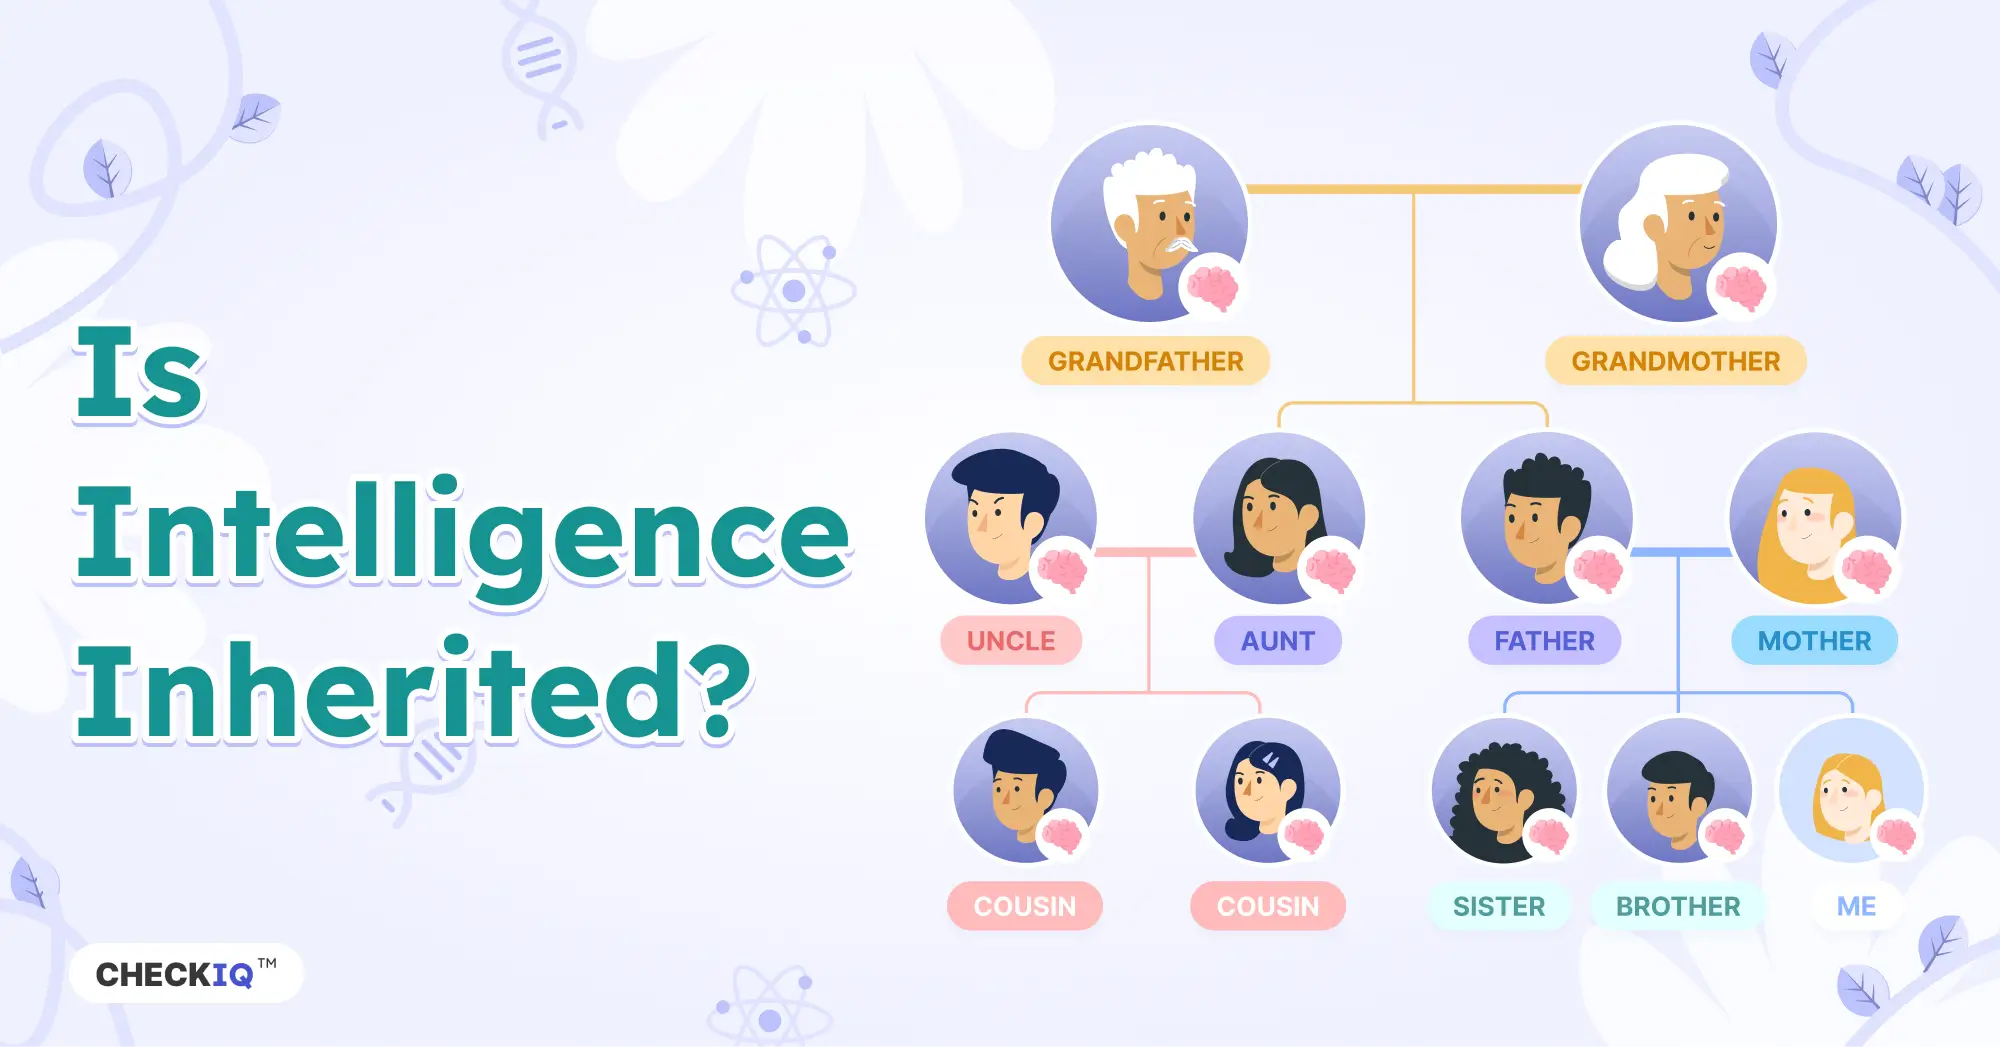 a family tree showing the inheritance of intelligence across generations